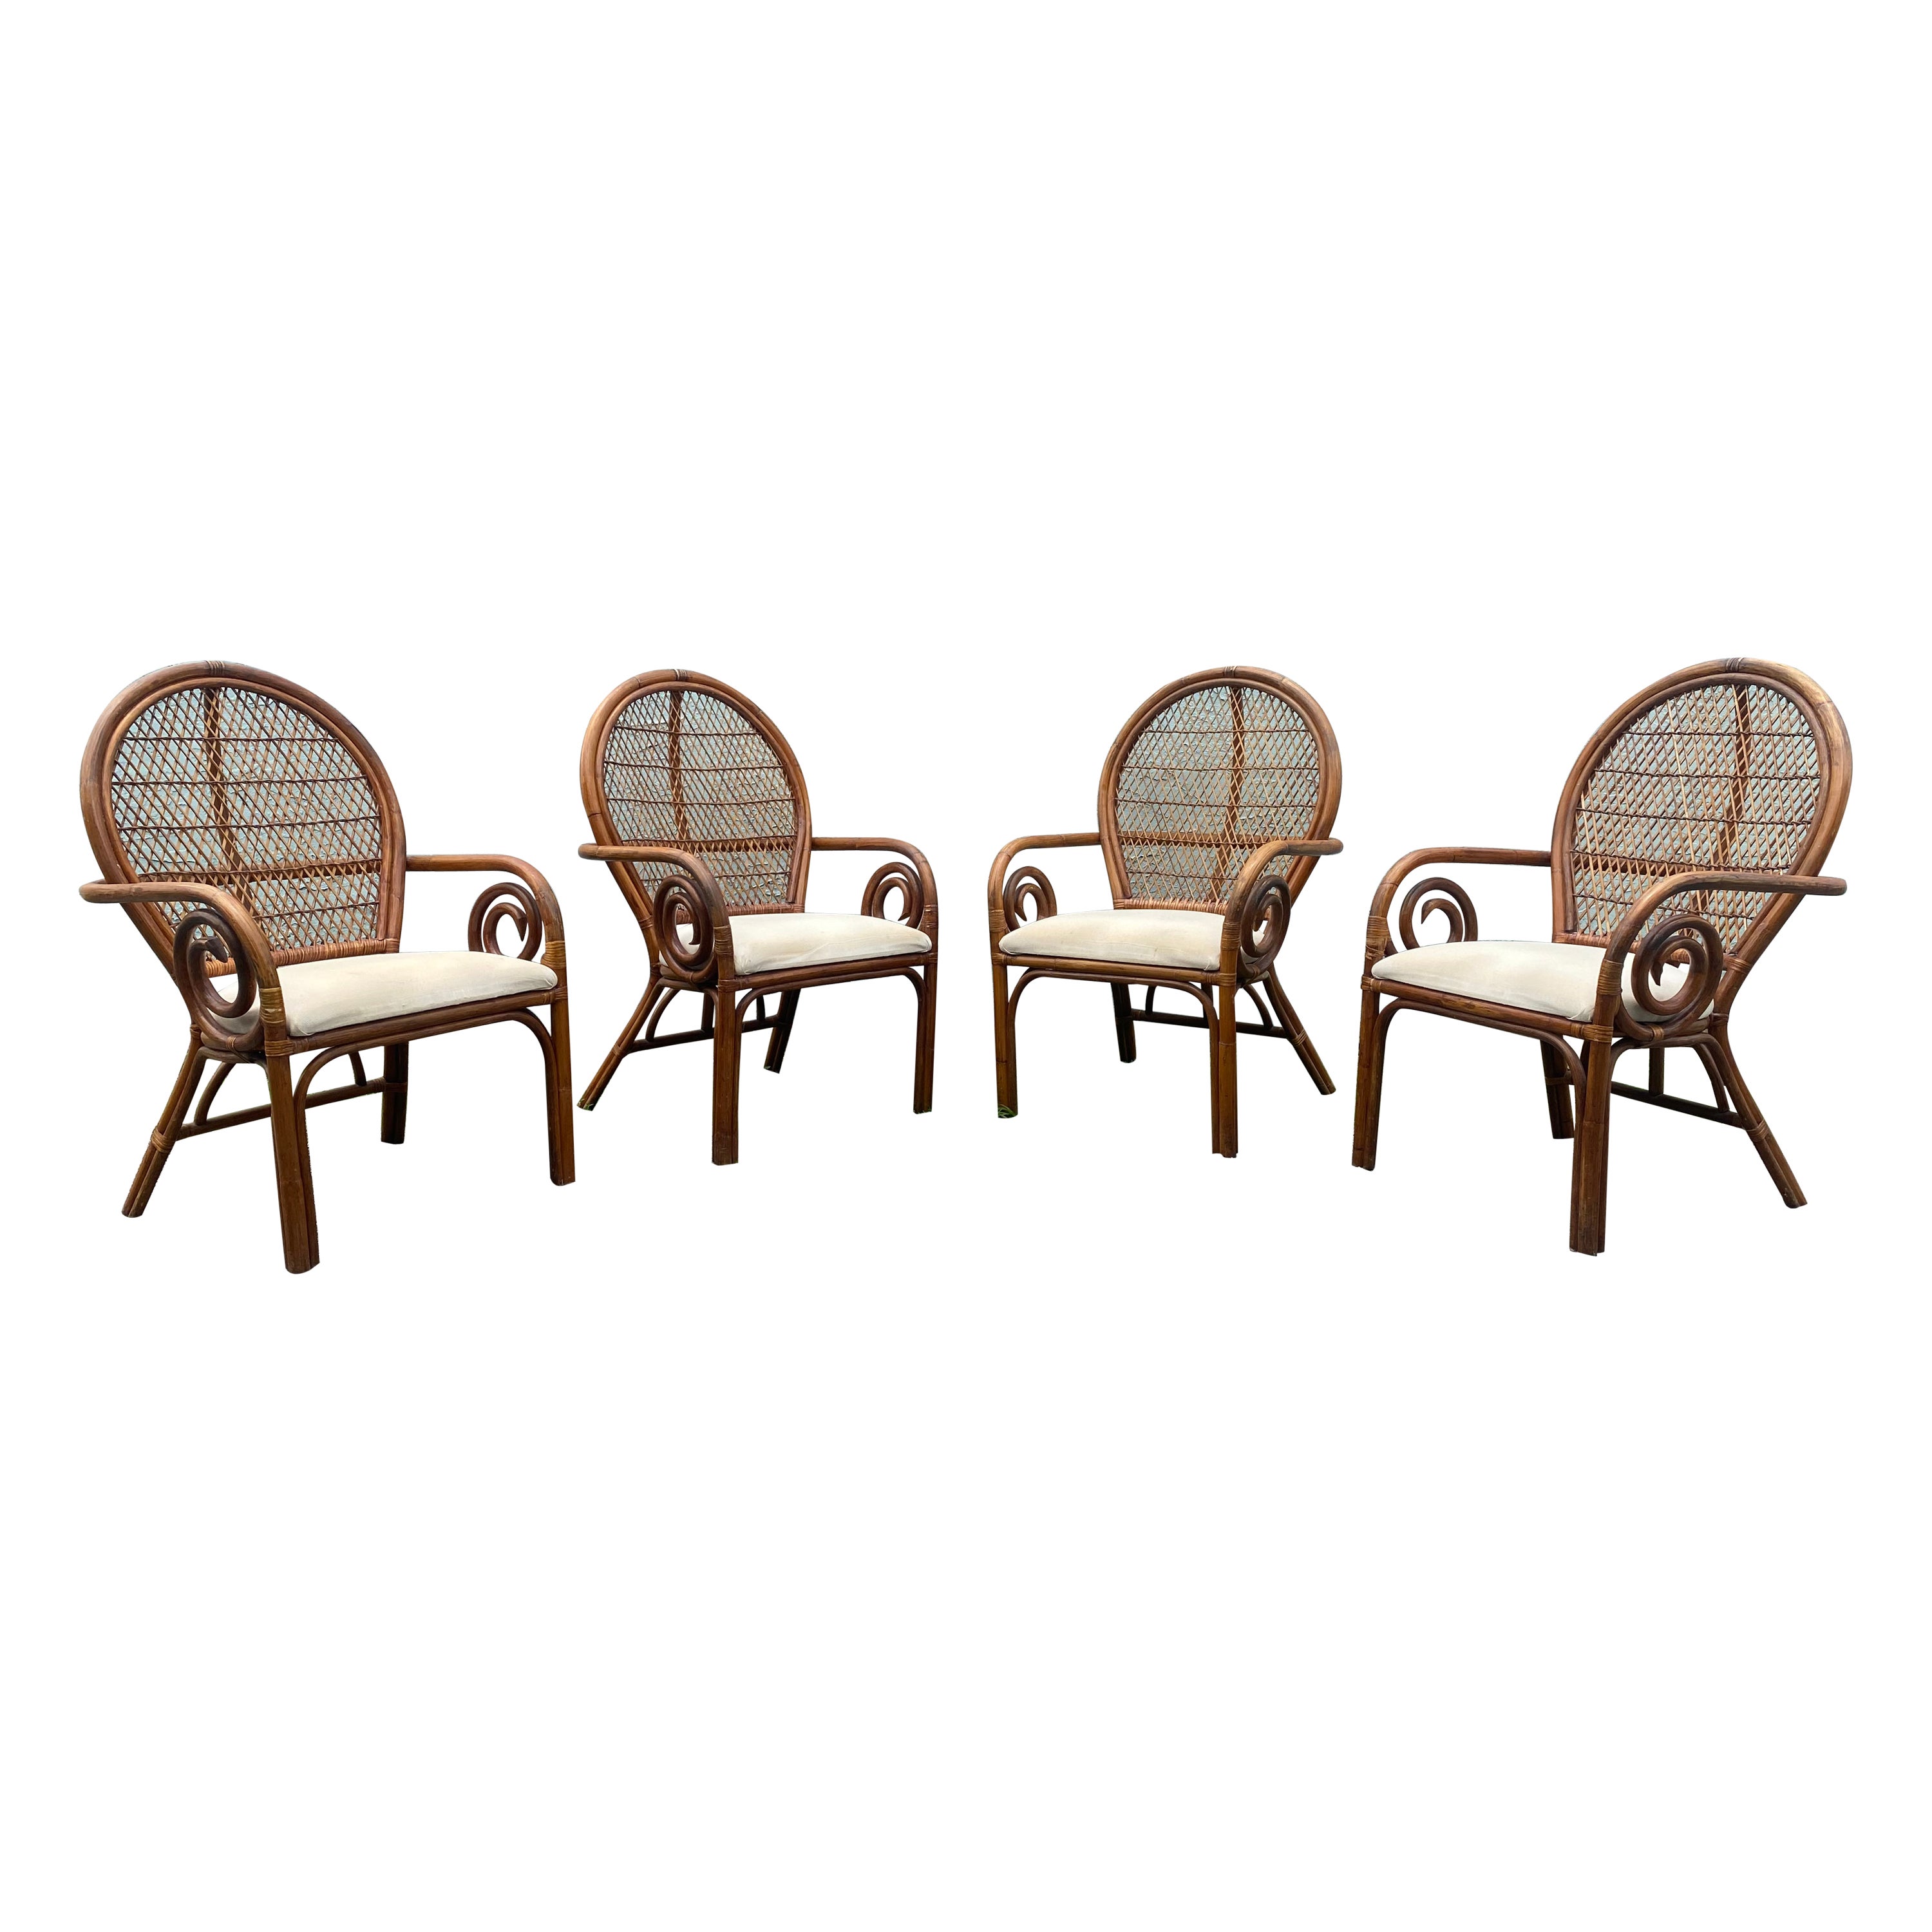 1970s Rattan Peacock Scroll Arm Sculptural Dining Side Chairs For Sale